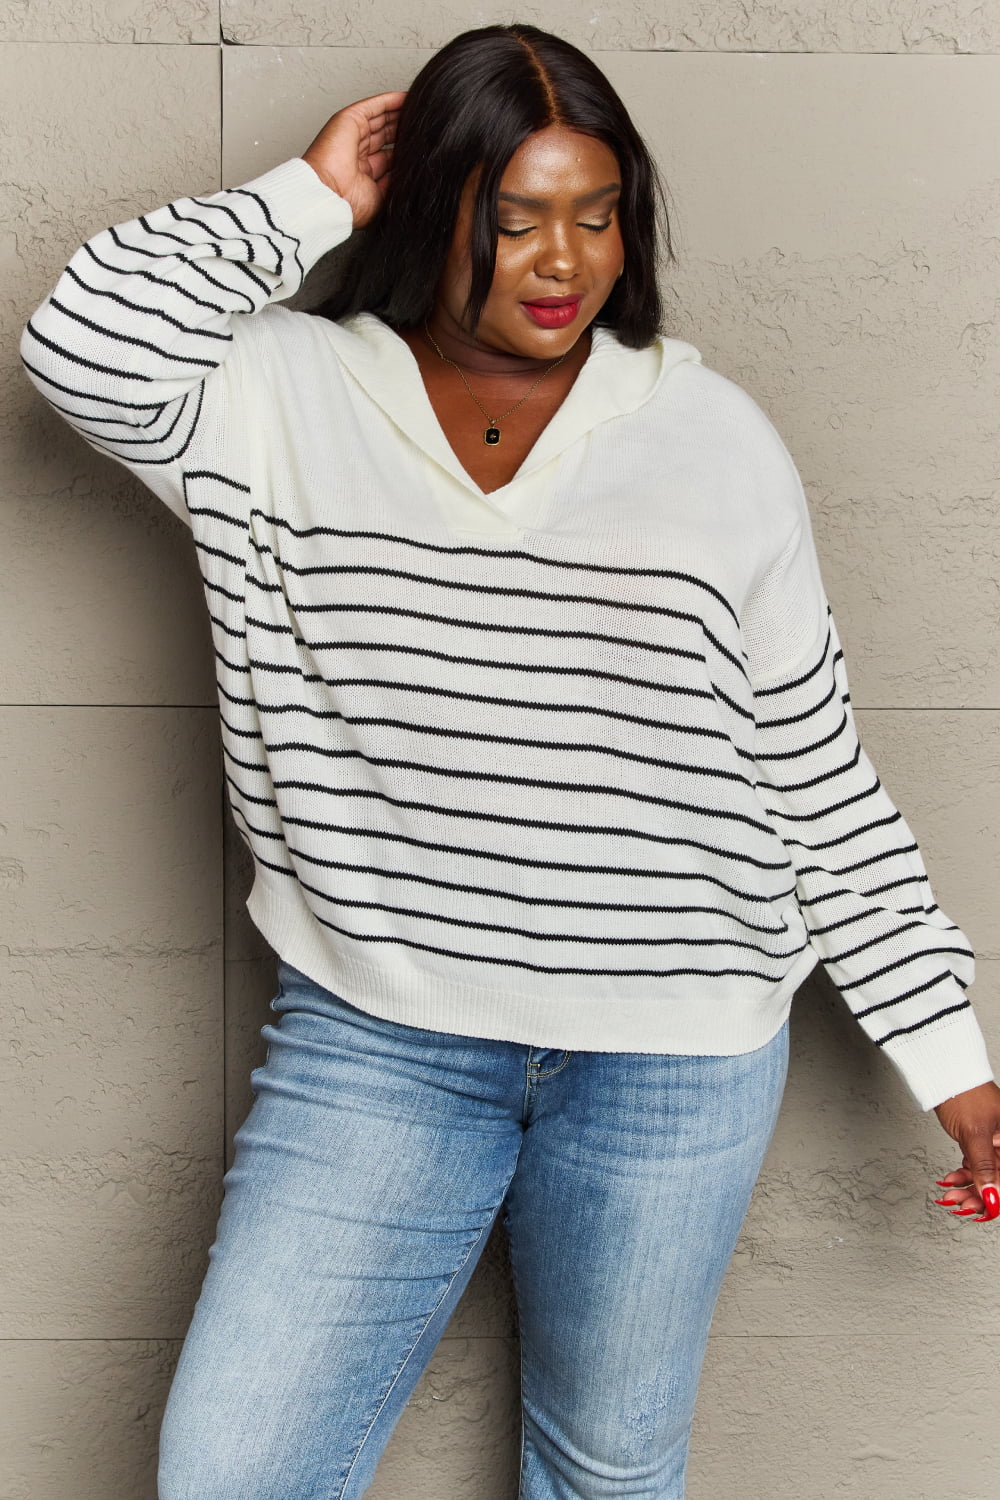 Sew In Love Make Me Smile Striped Oversized Knit Top - Earth Angel Lifestyle